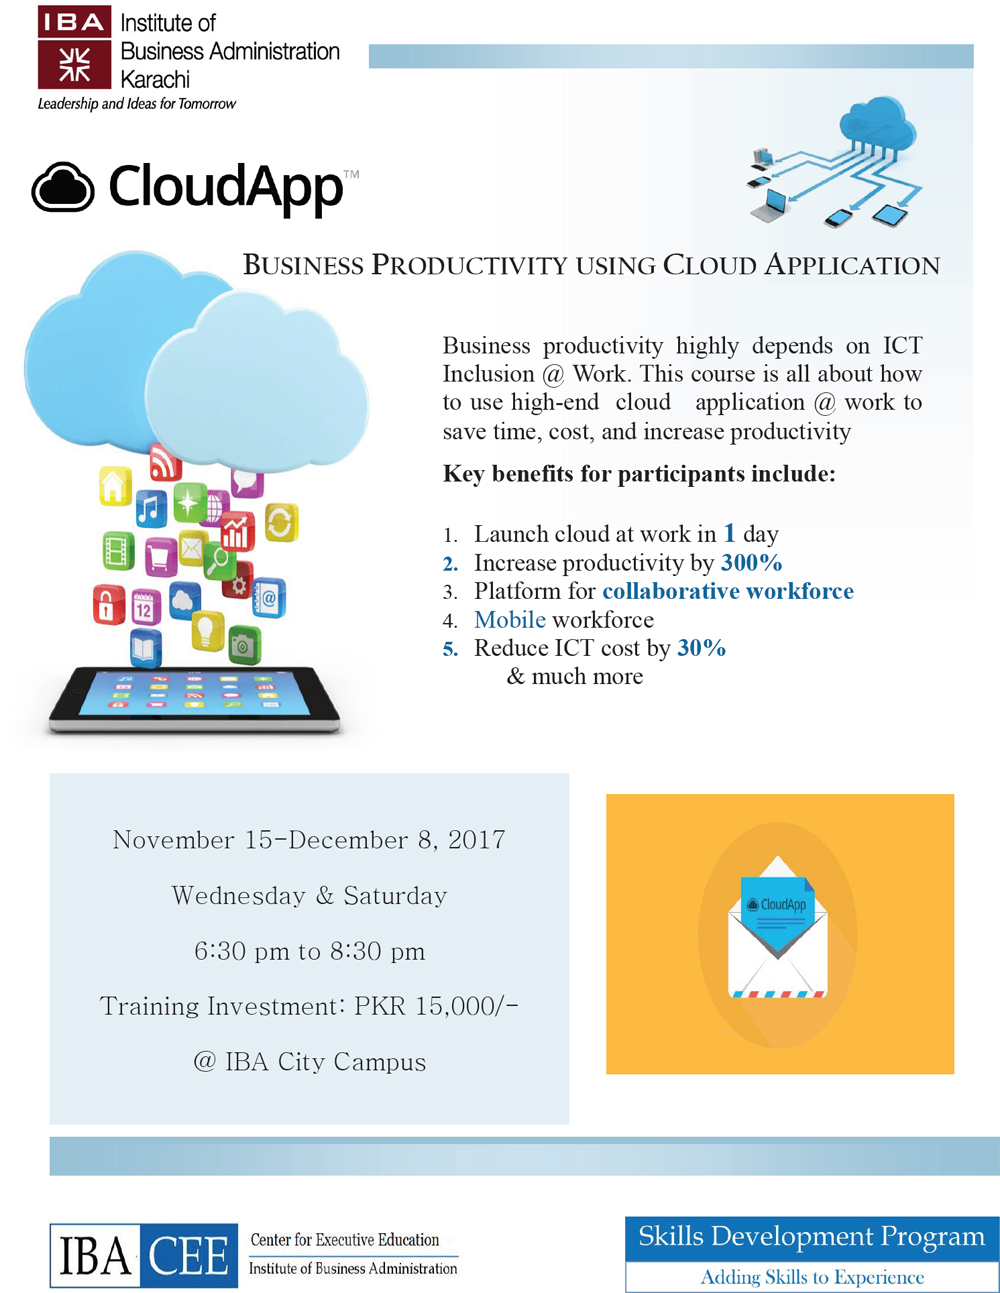 Business Productivity using Cloud Application